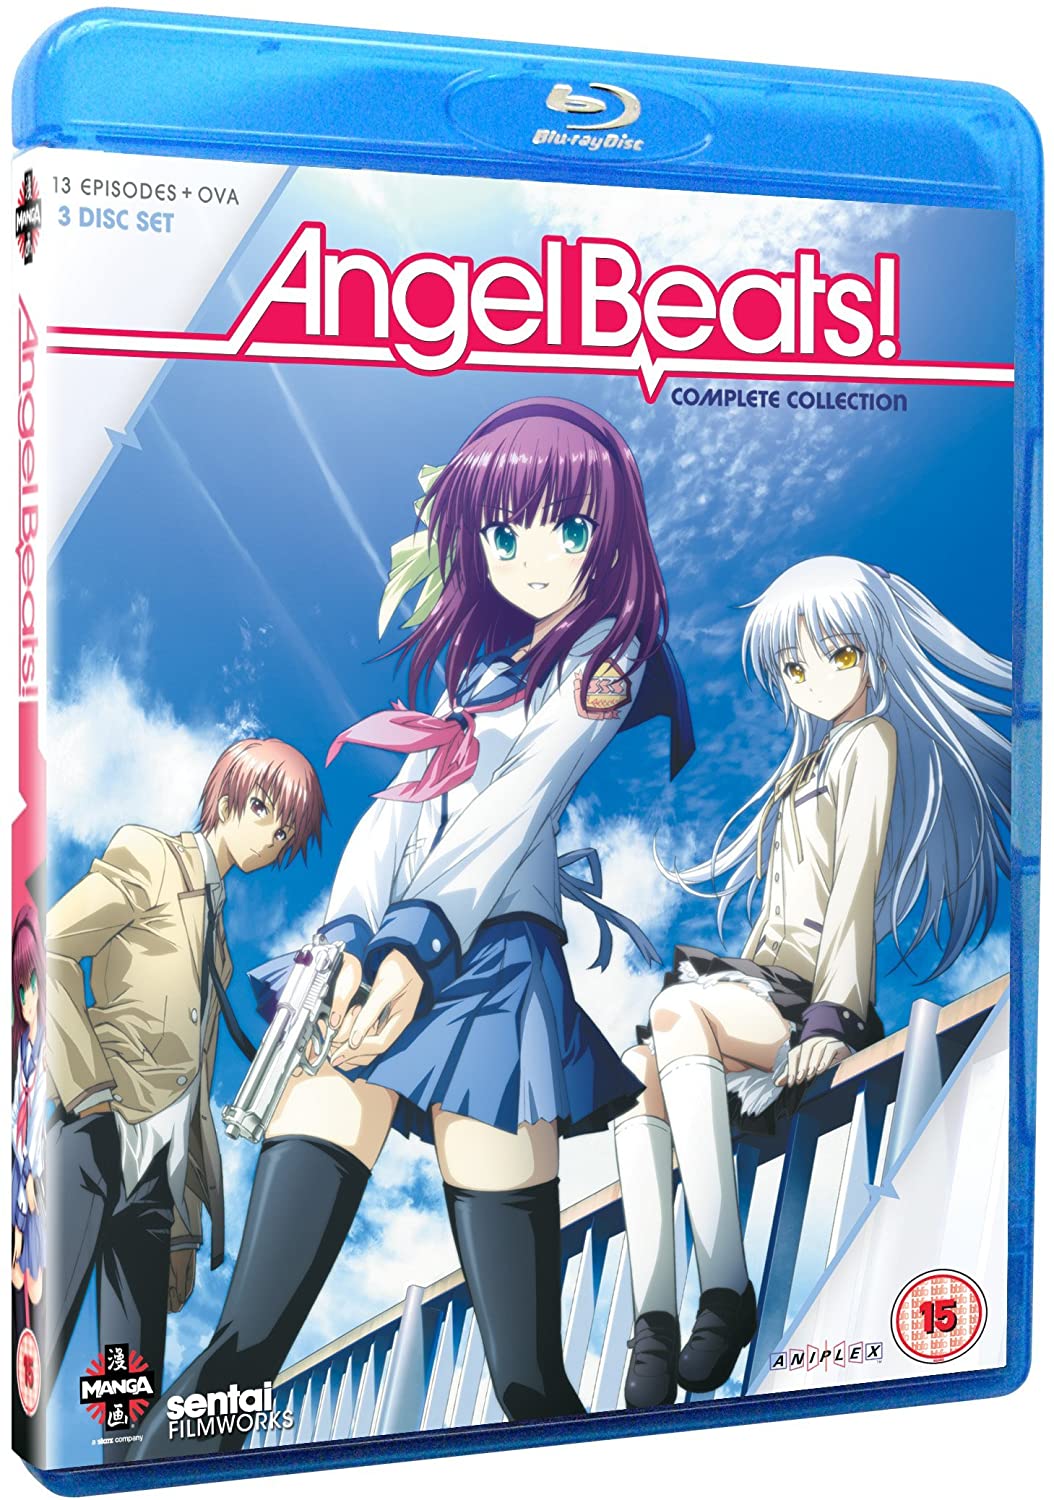 Anime Bluray - Angel Beats Complete Series Collection Blu-ray